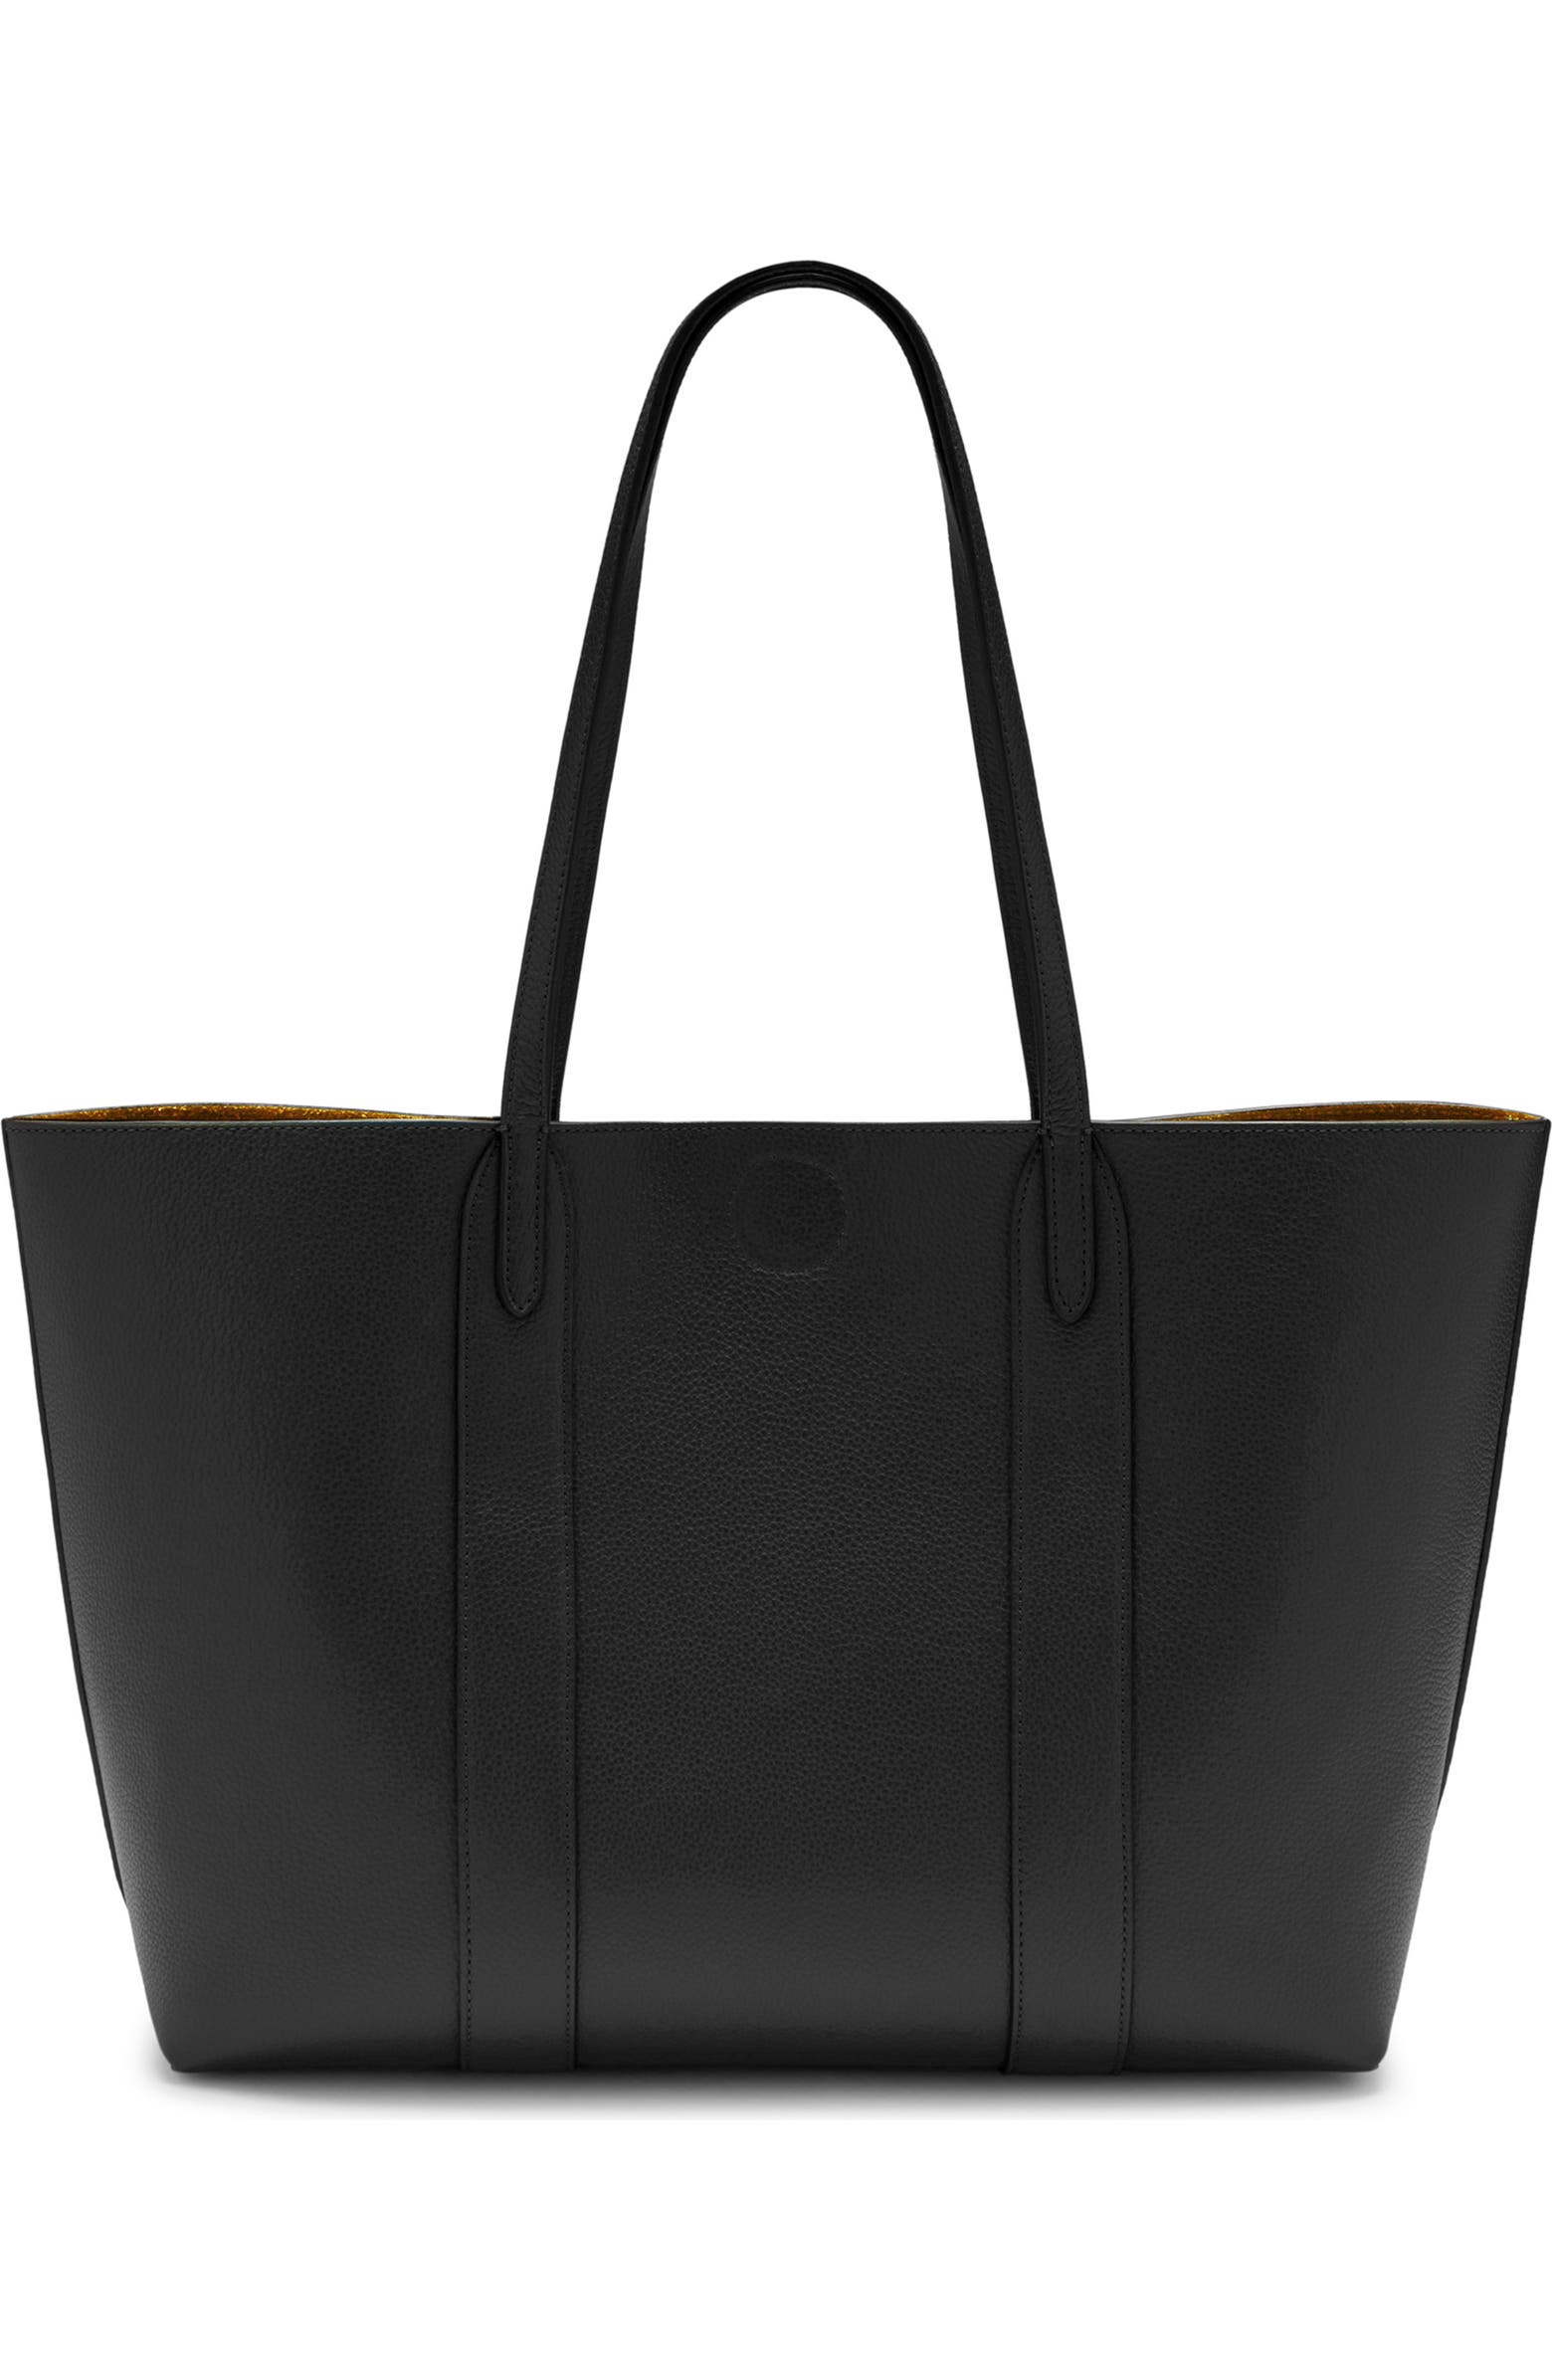 Mulberry Bayswater Leather Tote | Nordstrom